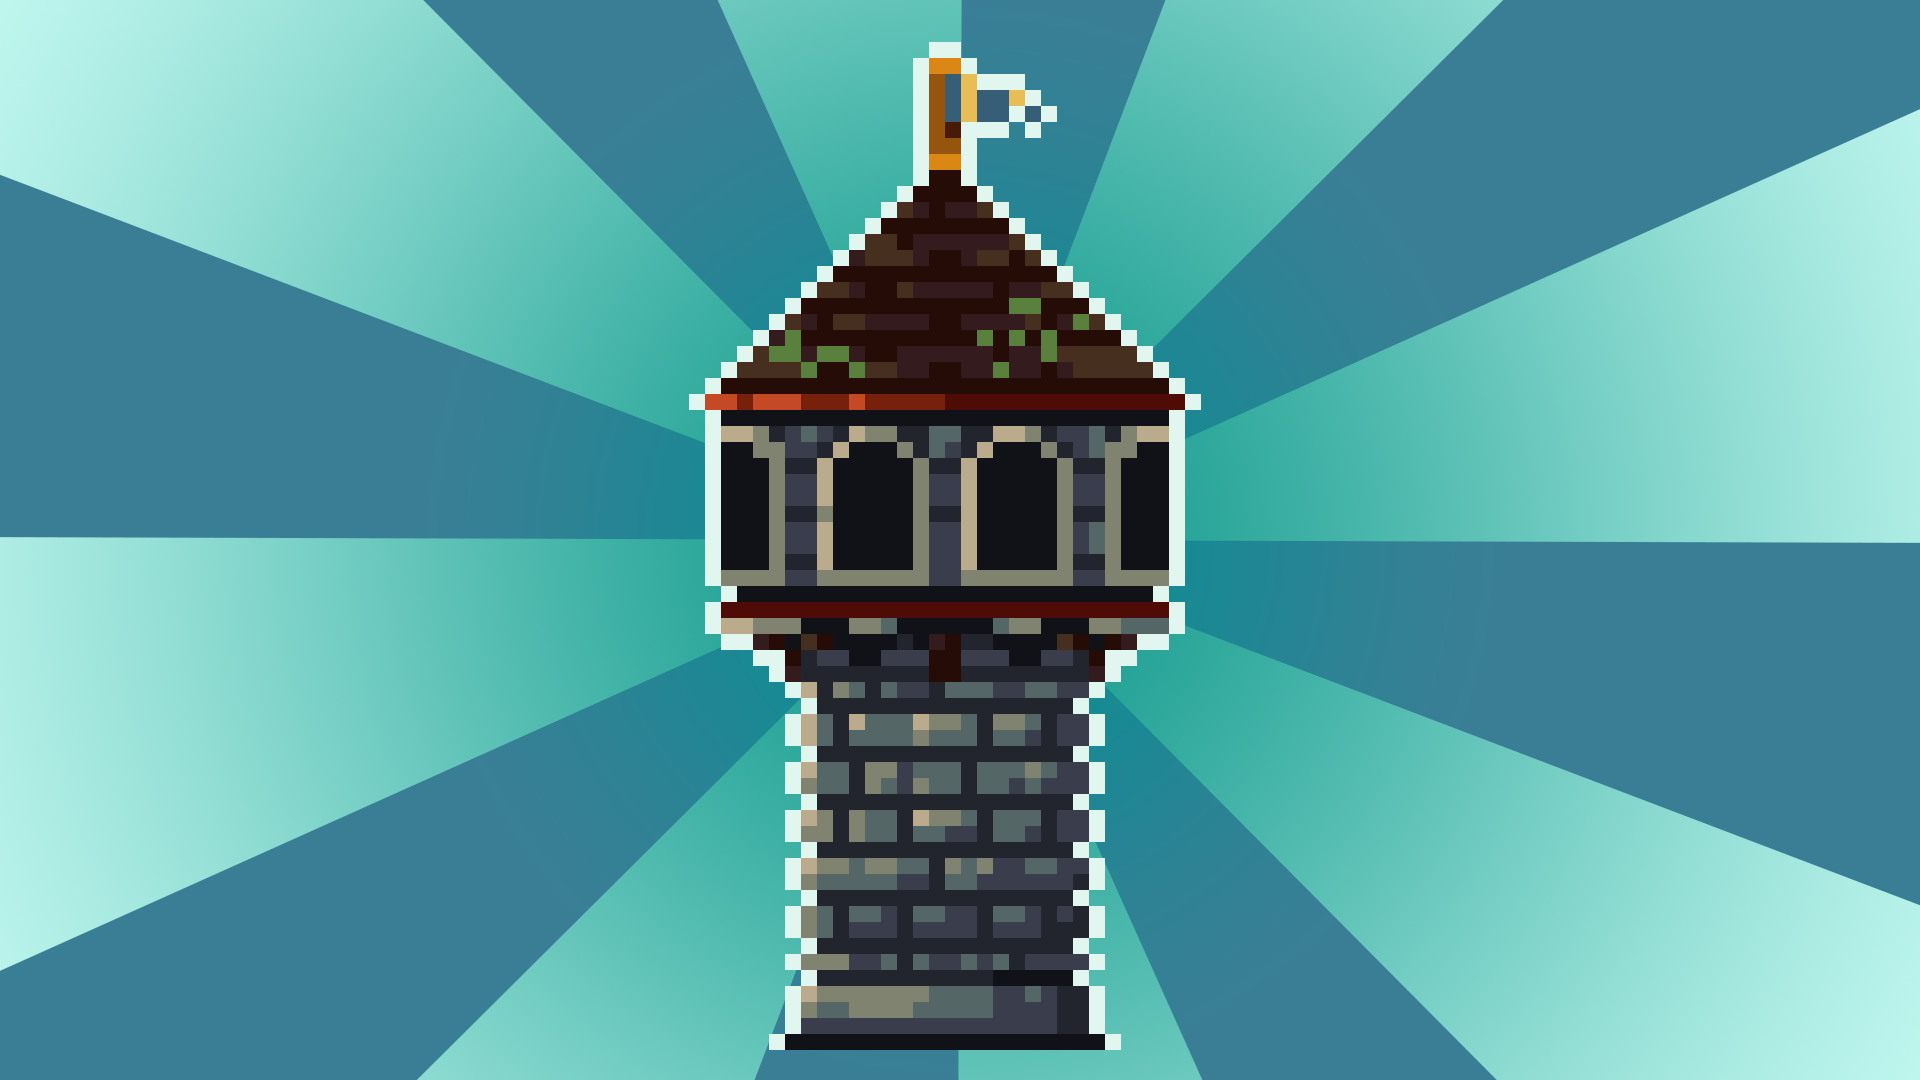 I HAVE THE TOWER!